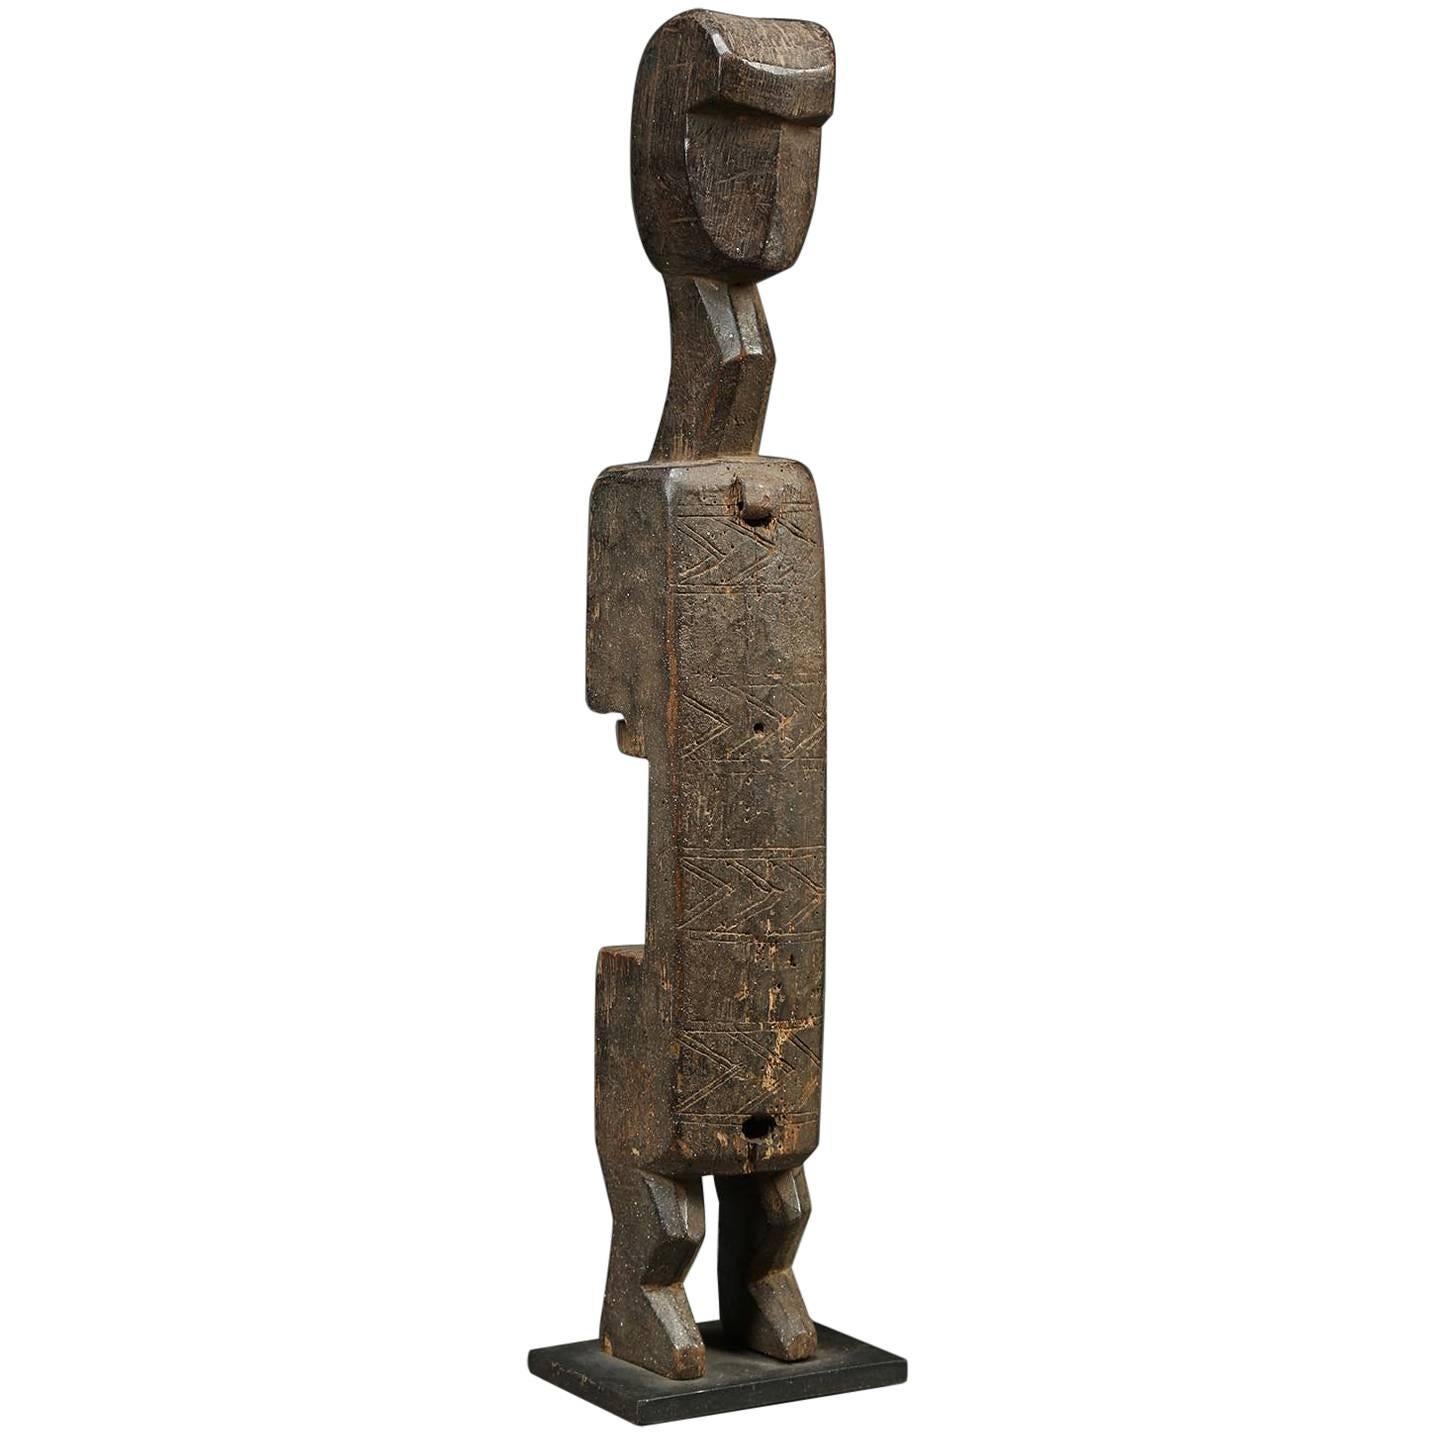 Fine Tribal Bambara cubist figurative wood door lock, early 20th century Mali, Africa great abstract figure with strong cubist stylized elegant face. 
The Bambara of Mali use decorated door locks sliding horizontal bar and with a removable key